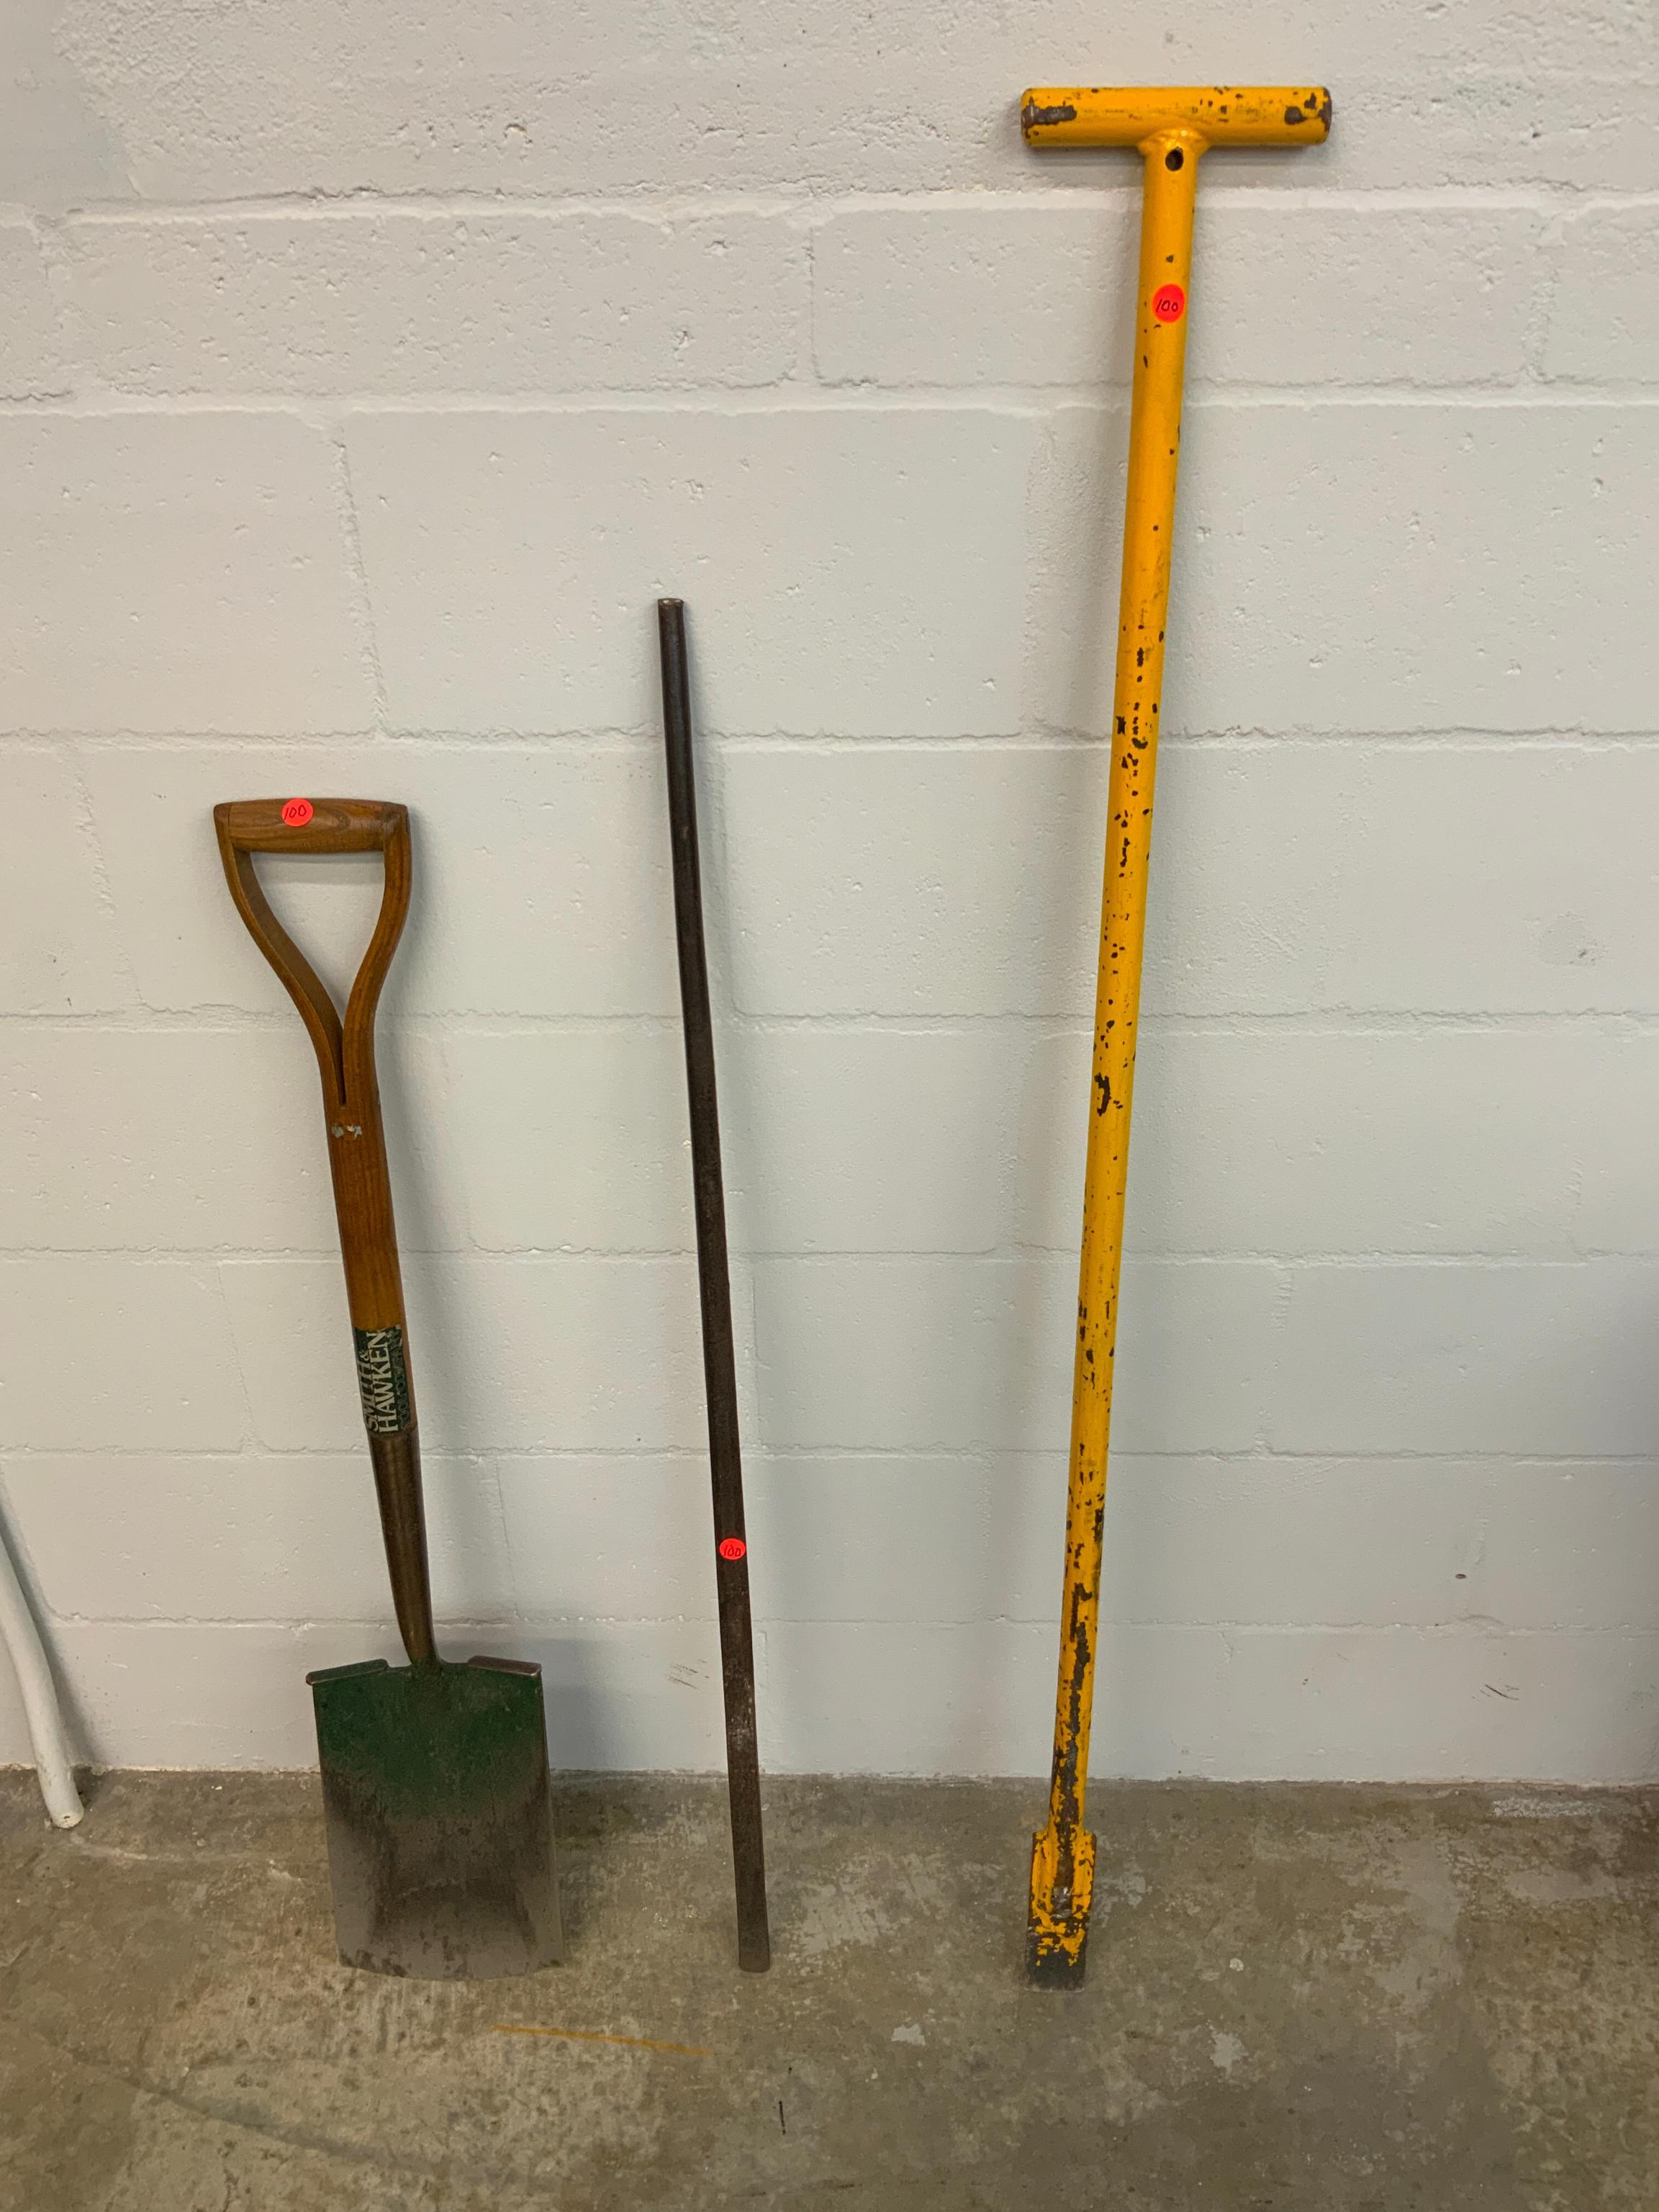 (2) PRY BARS AND A D HANDLE SQUARE SHOVEL SUPPORT